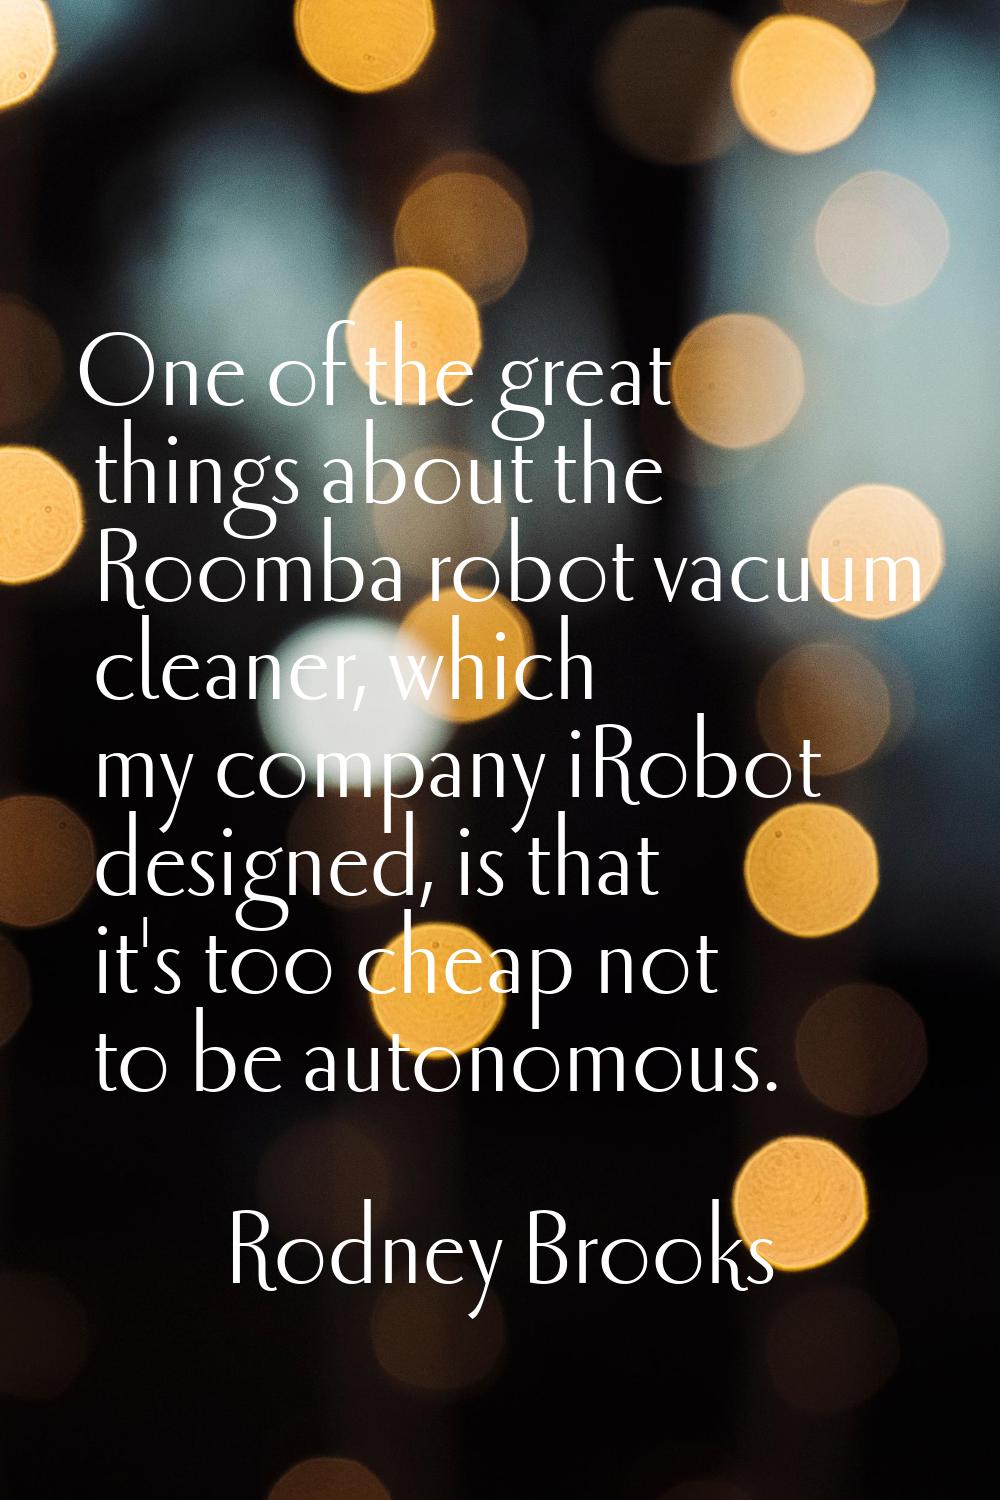 One of the great things about the Roomba robot vacuum cleaner, which my company iRobot designed, is